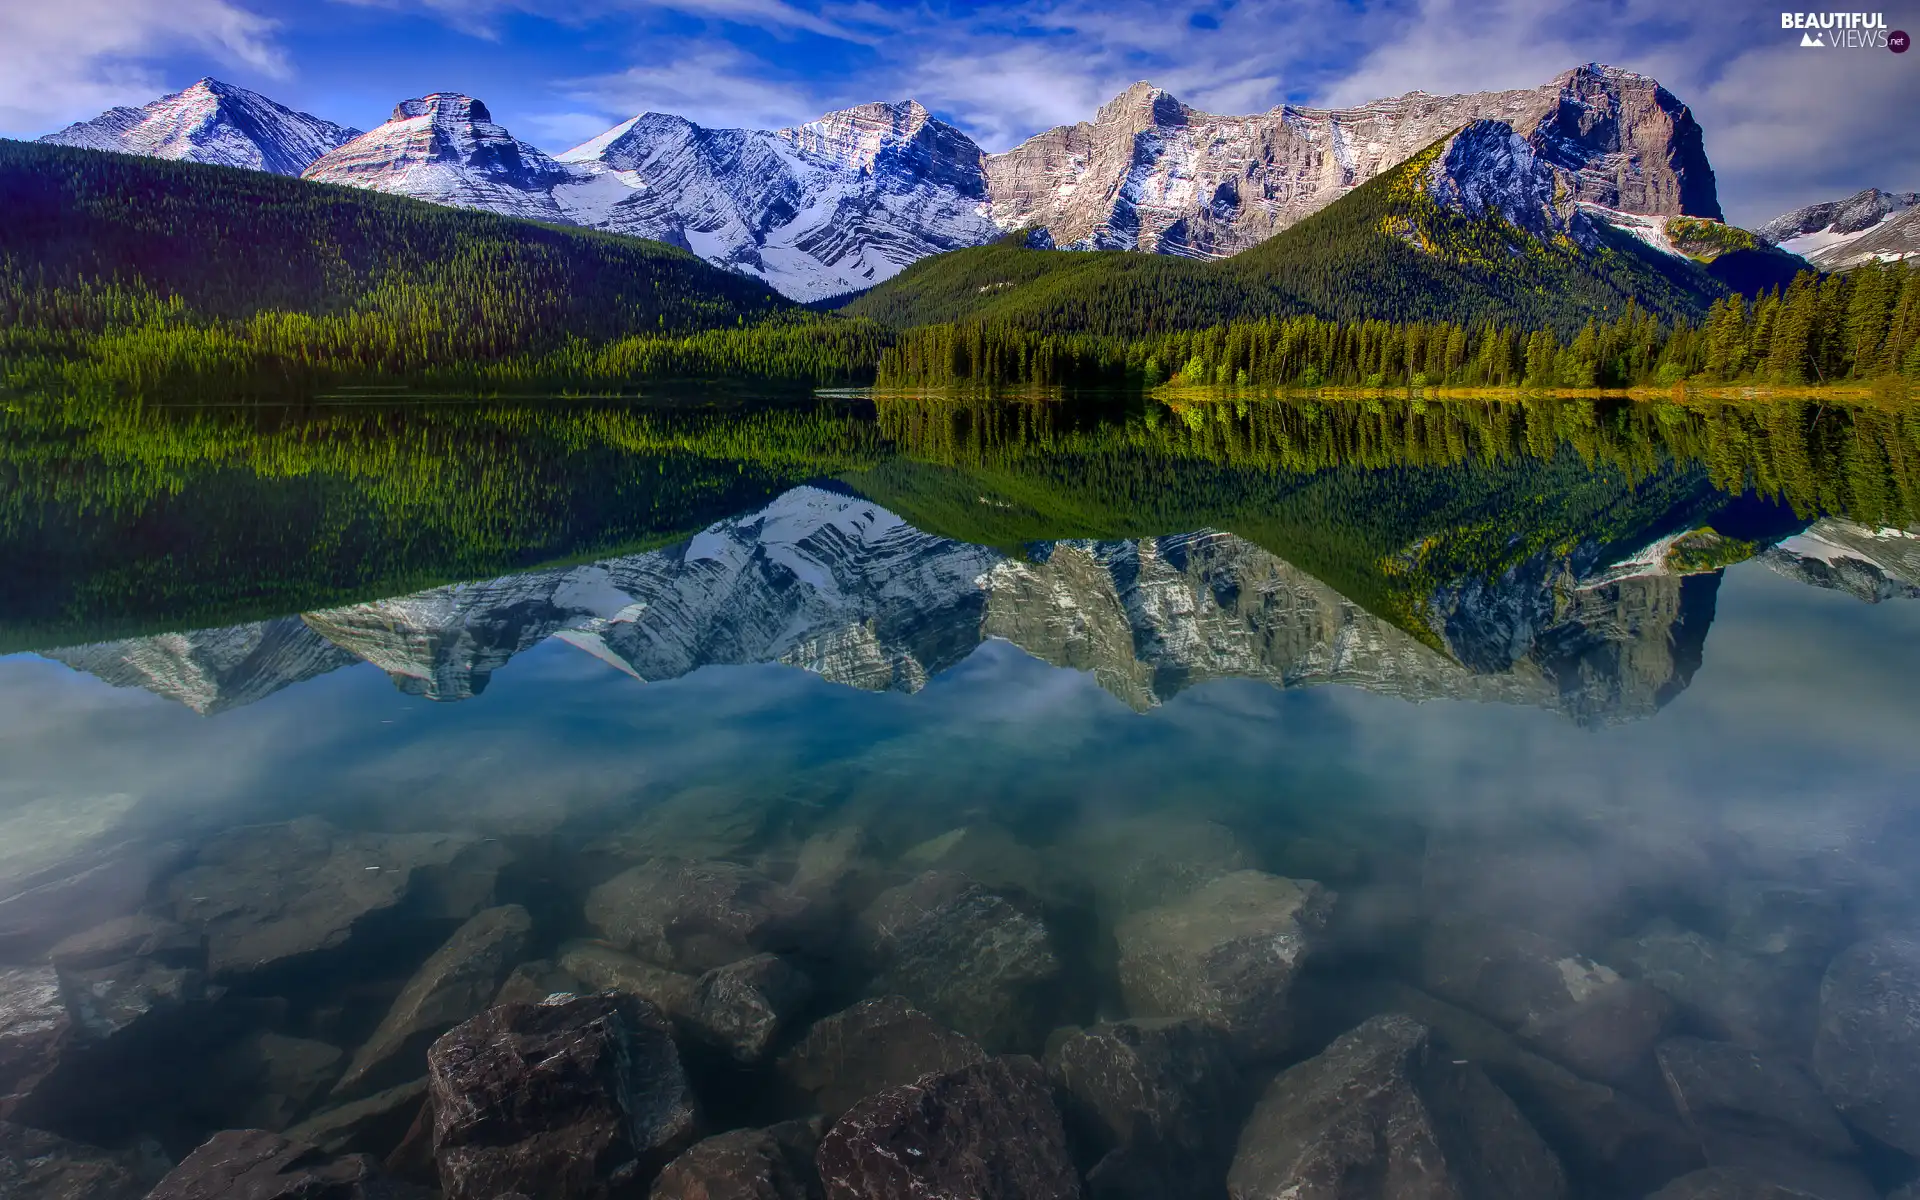 trees, forest, viewes, Mountains, Stones, reflection, peaks, lake, Snowy